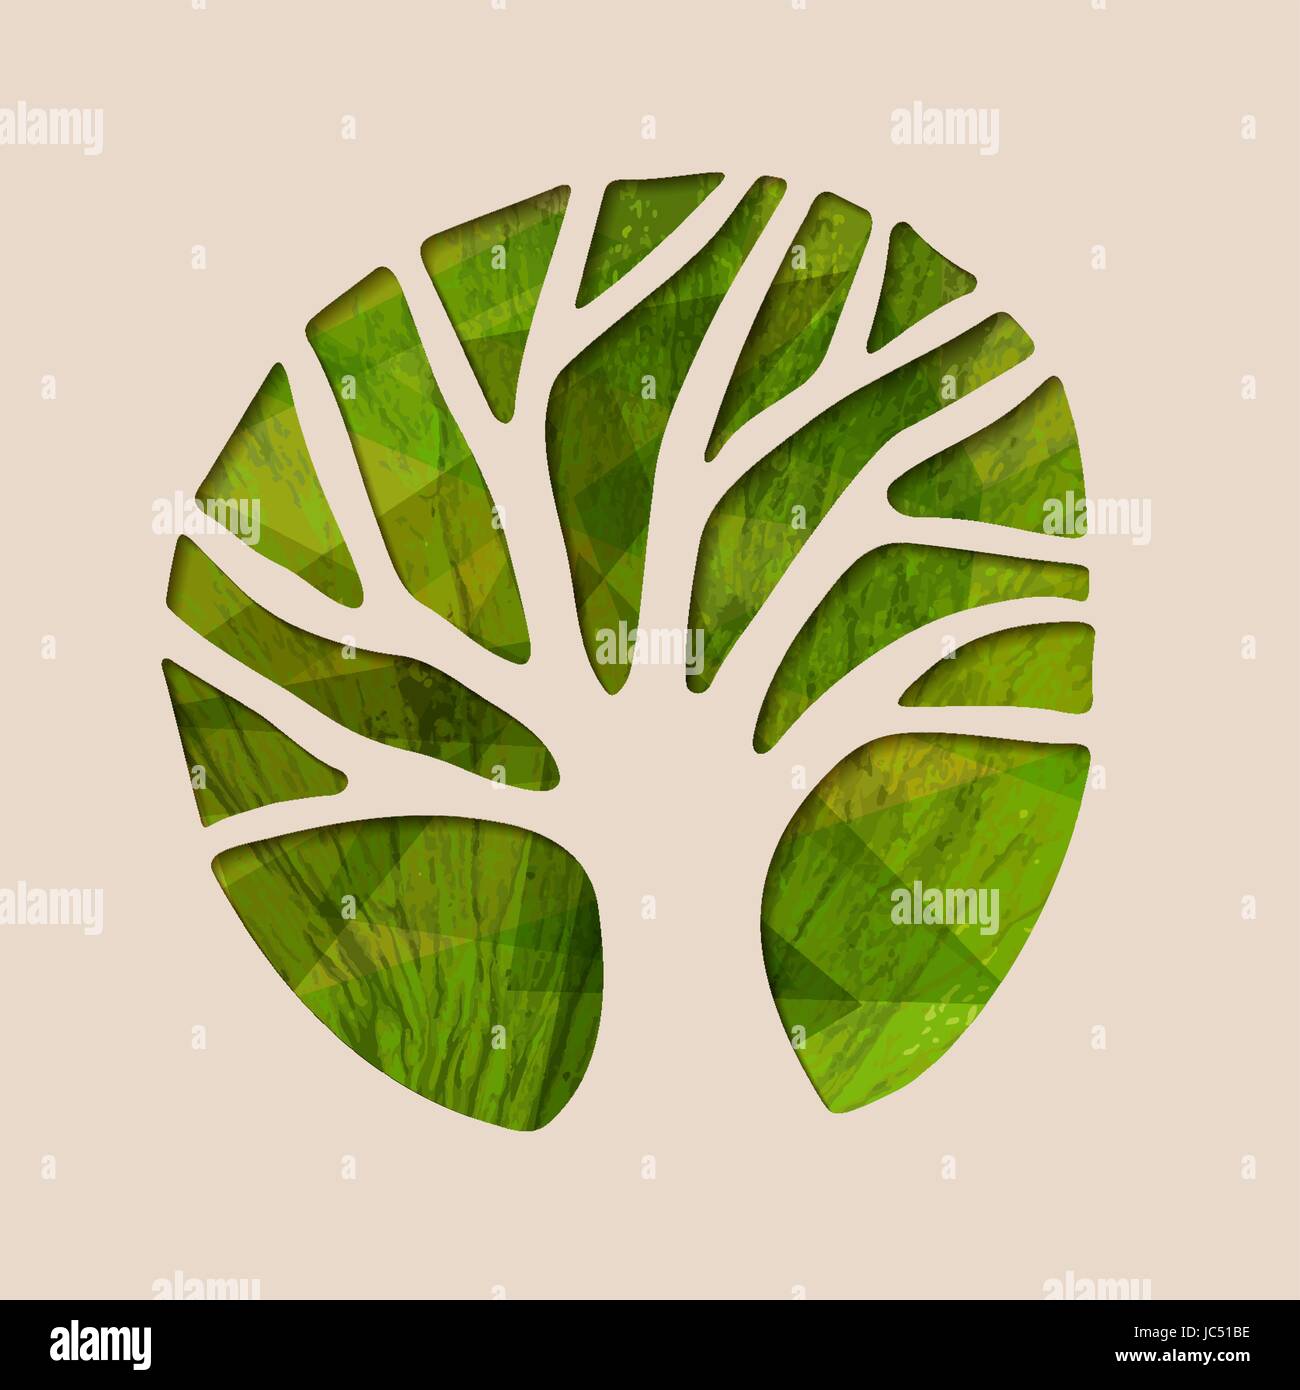 Tree silhouette shape with green leaf texture in paper cut style. Concept illustration for environment care or nature help project. EPS10 vector. Stock Vector